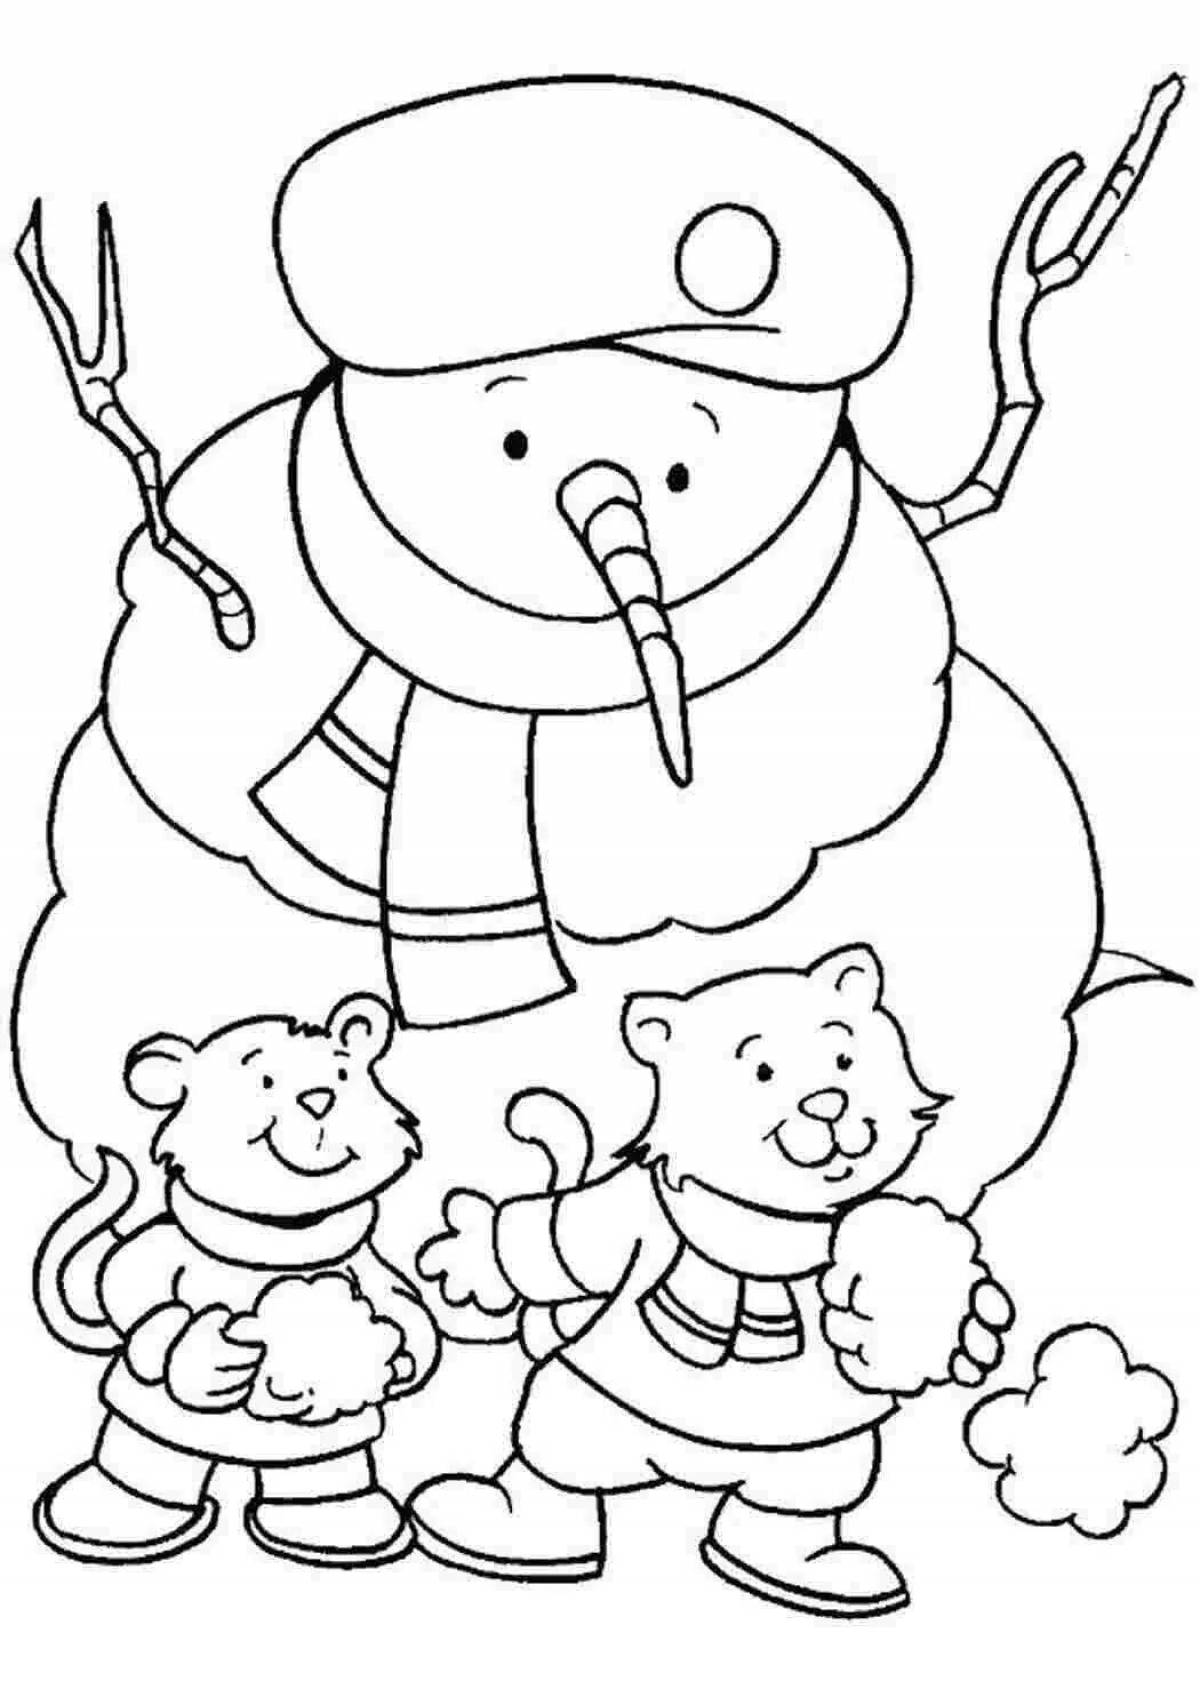 Awesome winter coloring pages for kids 4 5